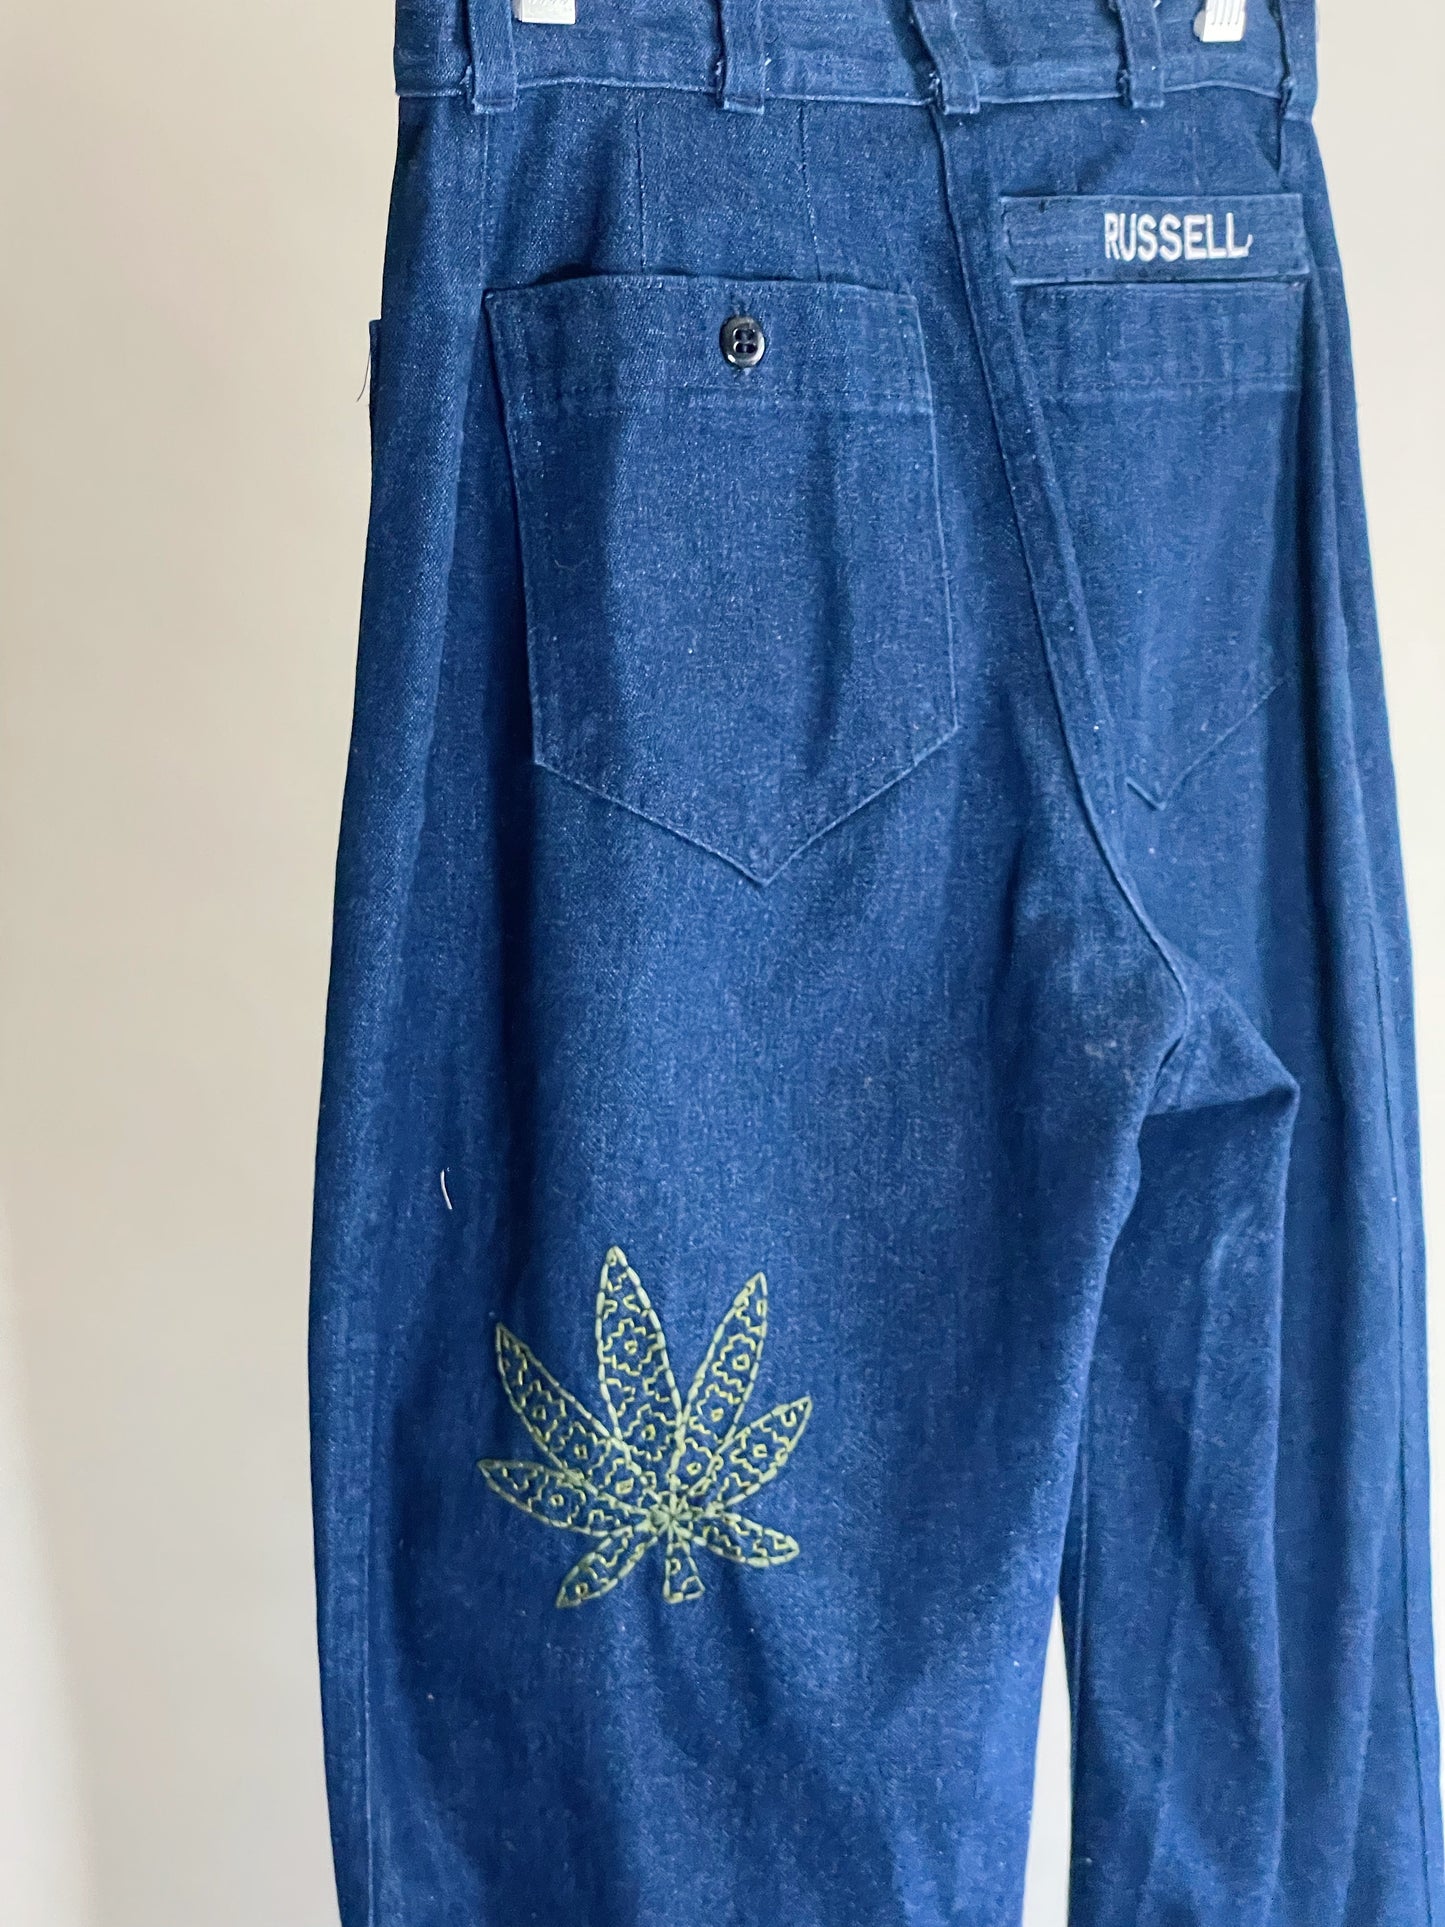 27" Waist Vintage 1970's Seafarer Bell Bottoms with Embroidery